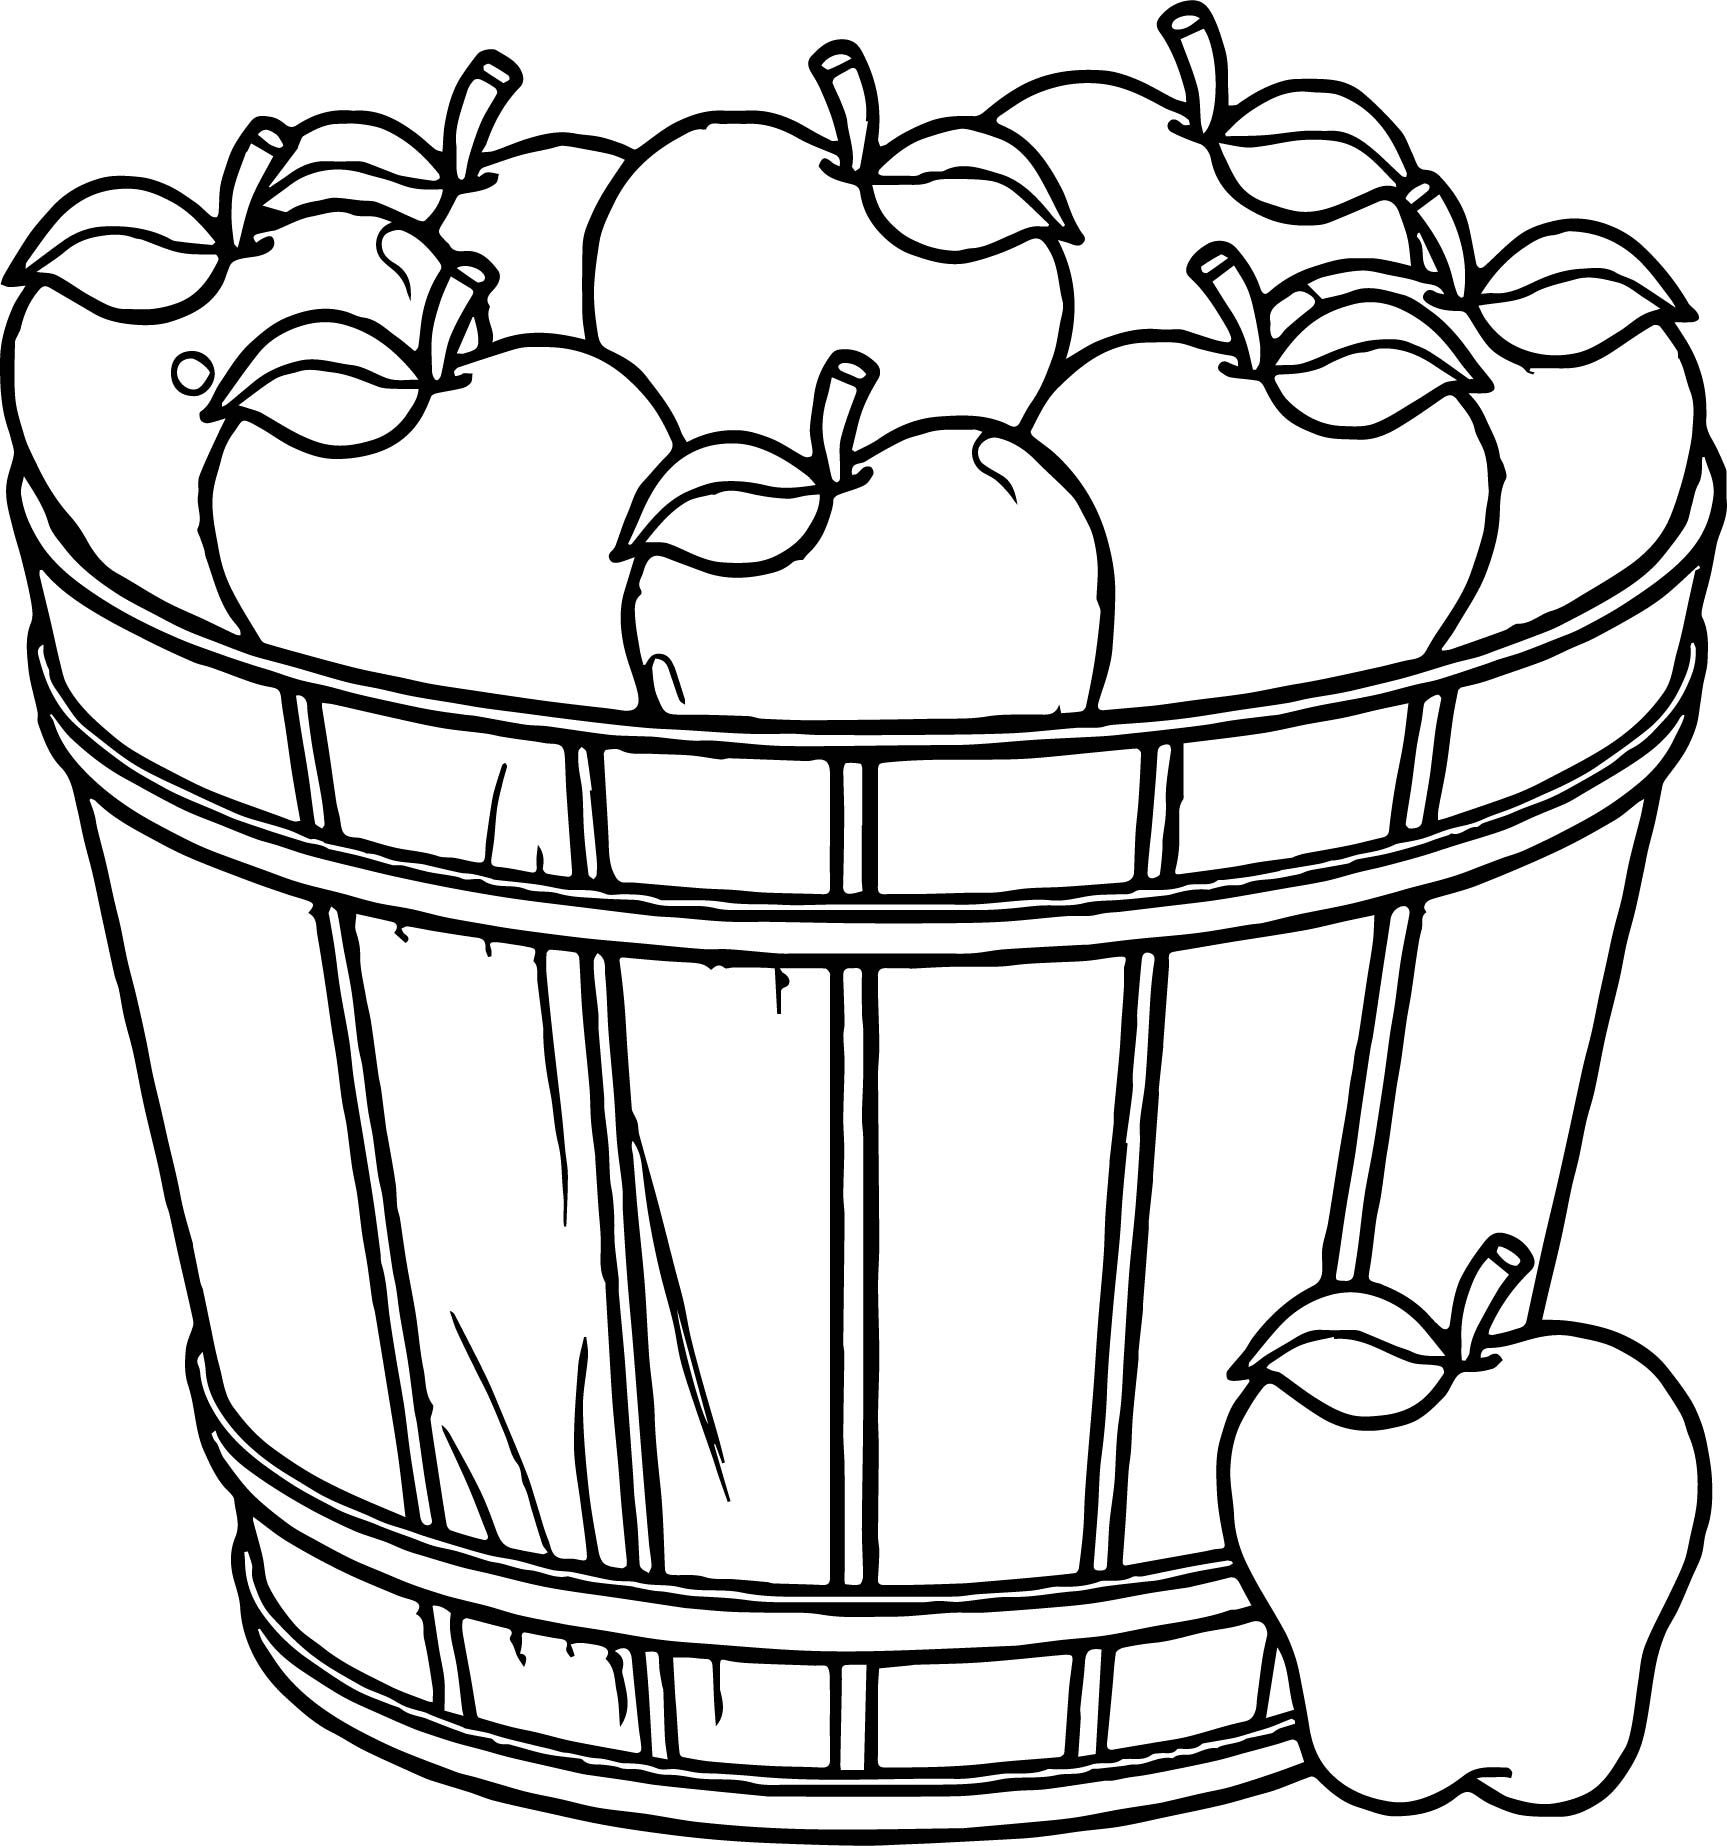 Cool Apple Basket Coloring Page